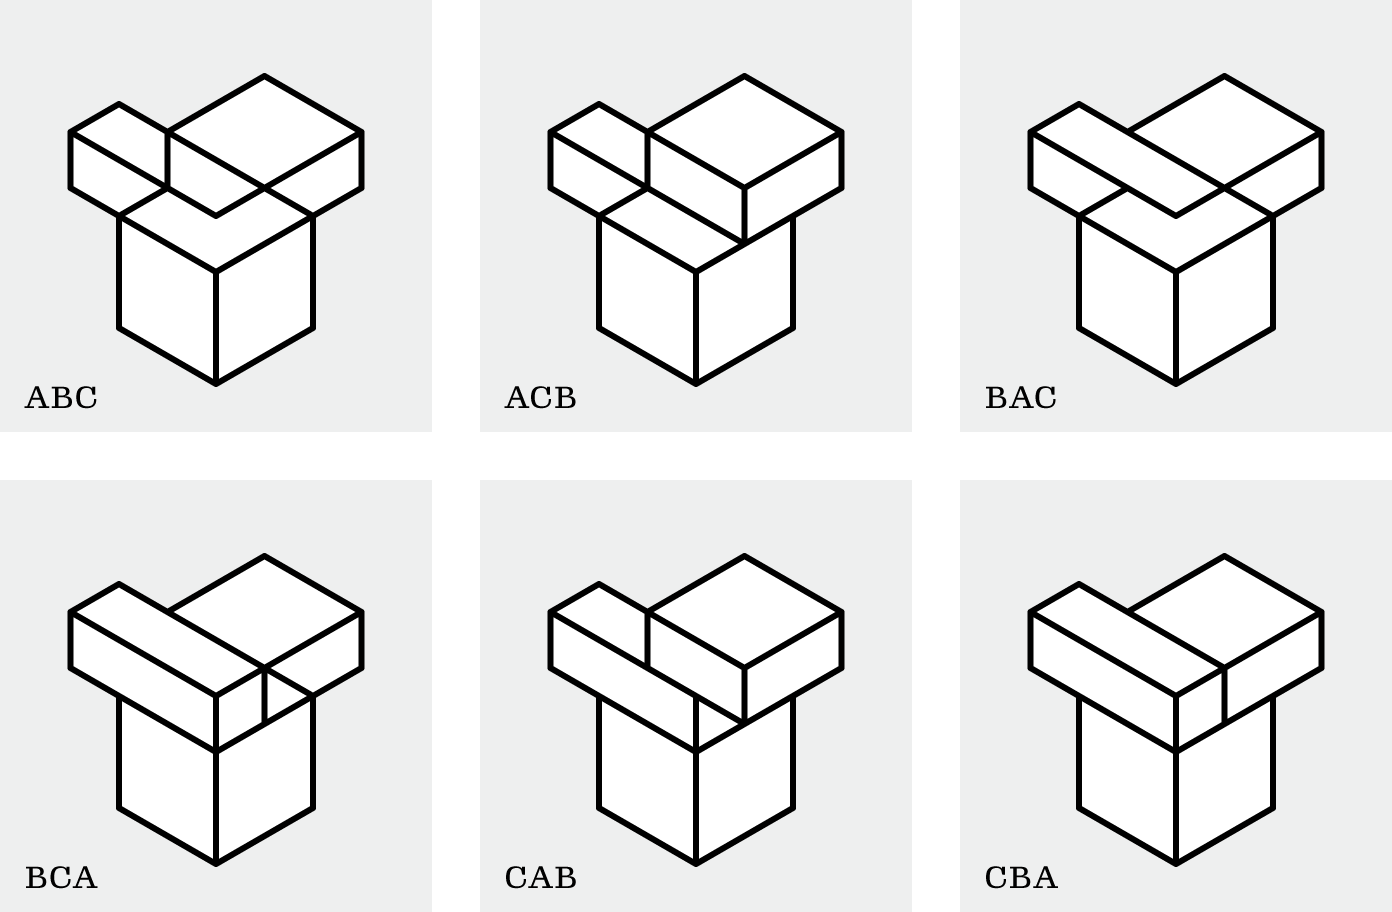 Six different stacking orders for one arrangement of isometric blocks: ABC, ACB, BAC, BCA, CAB, CBA